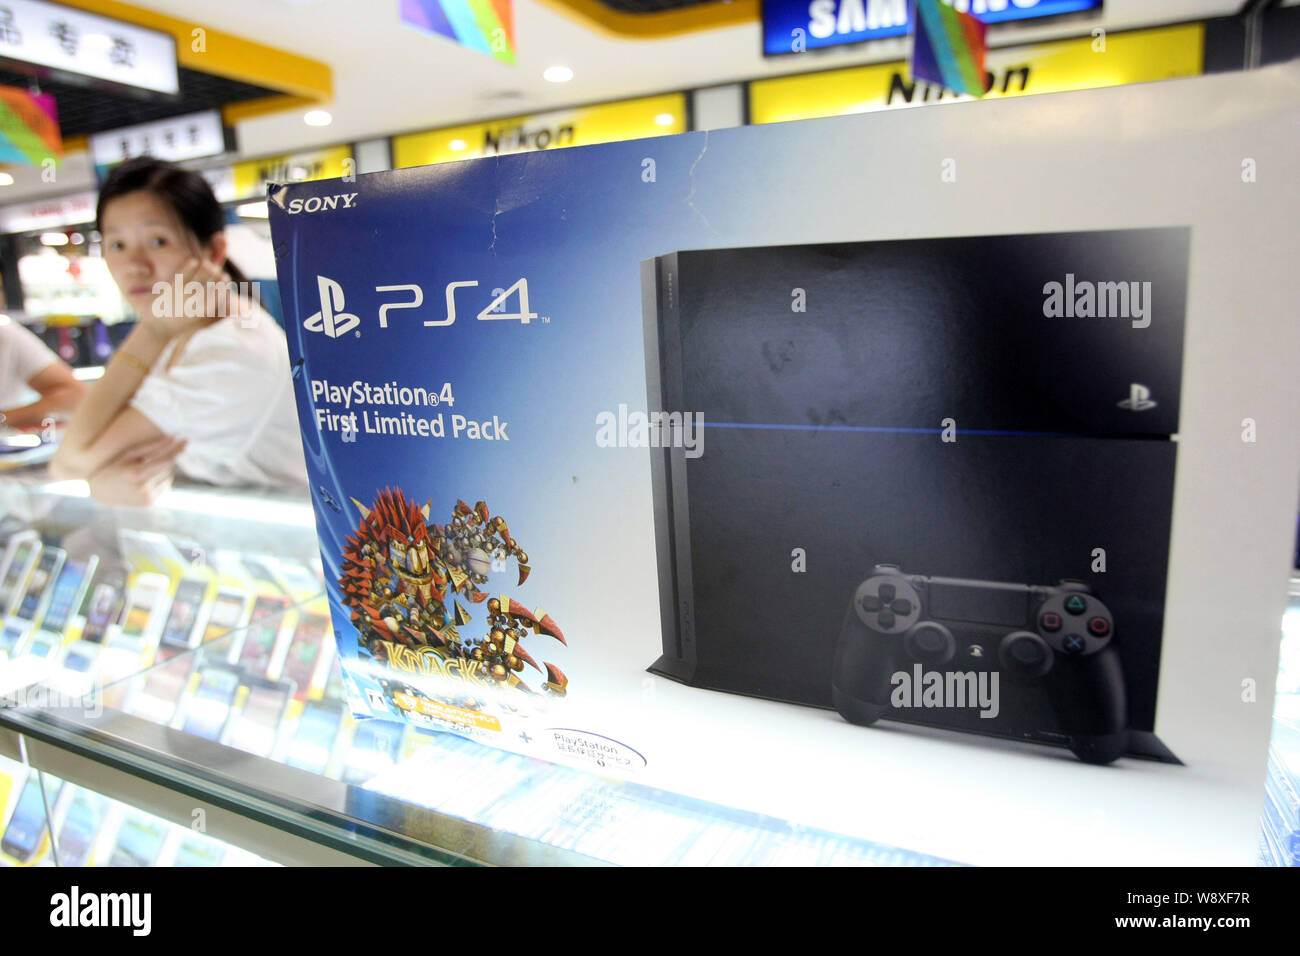 A Chinese Vendor Looks On Next To A Smuggled Sony Playstation 4 Ps4 Game Console For Sale At A Digital Products Mall In Shanghai China 29 May 14 Stock Photo Alamy